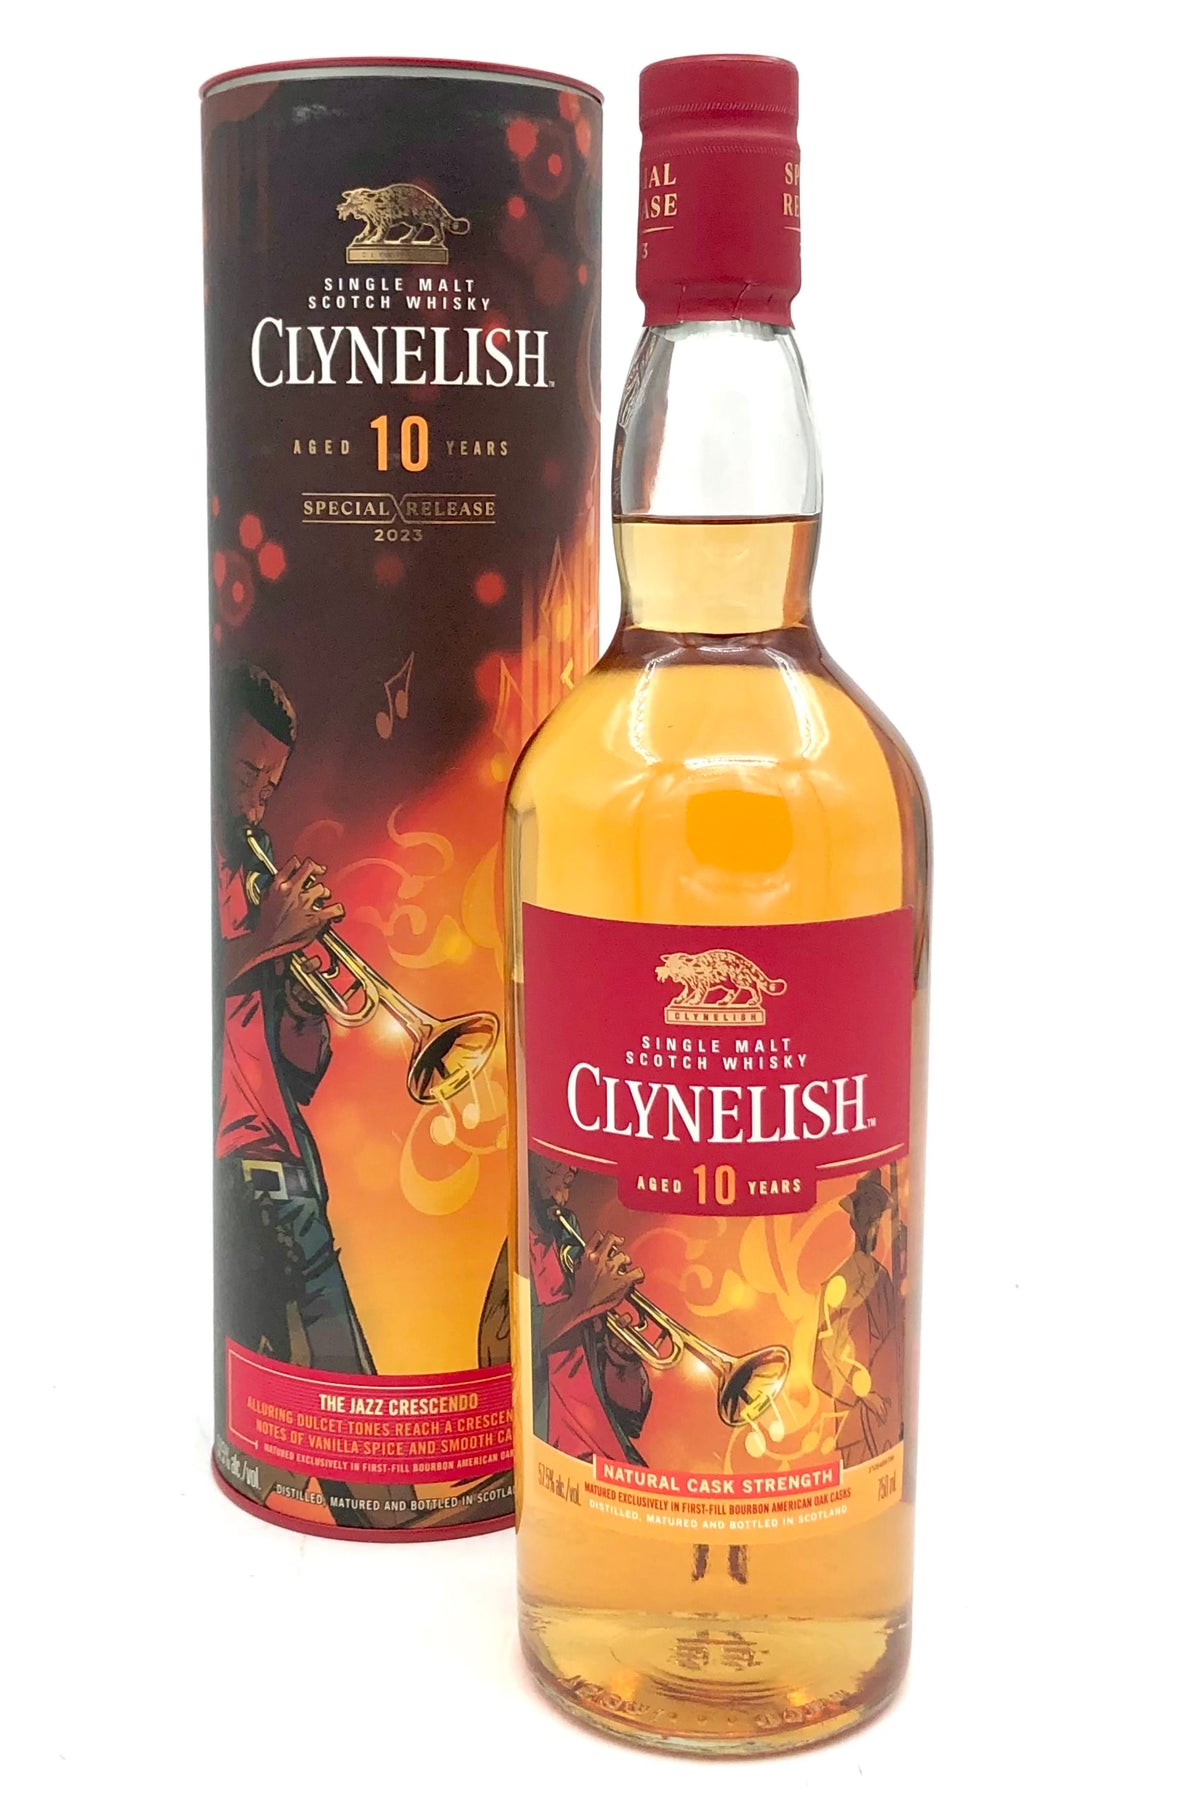 Clynelish 10 Year Scotch Whisky 2023 Diageo Special Release